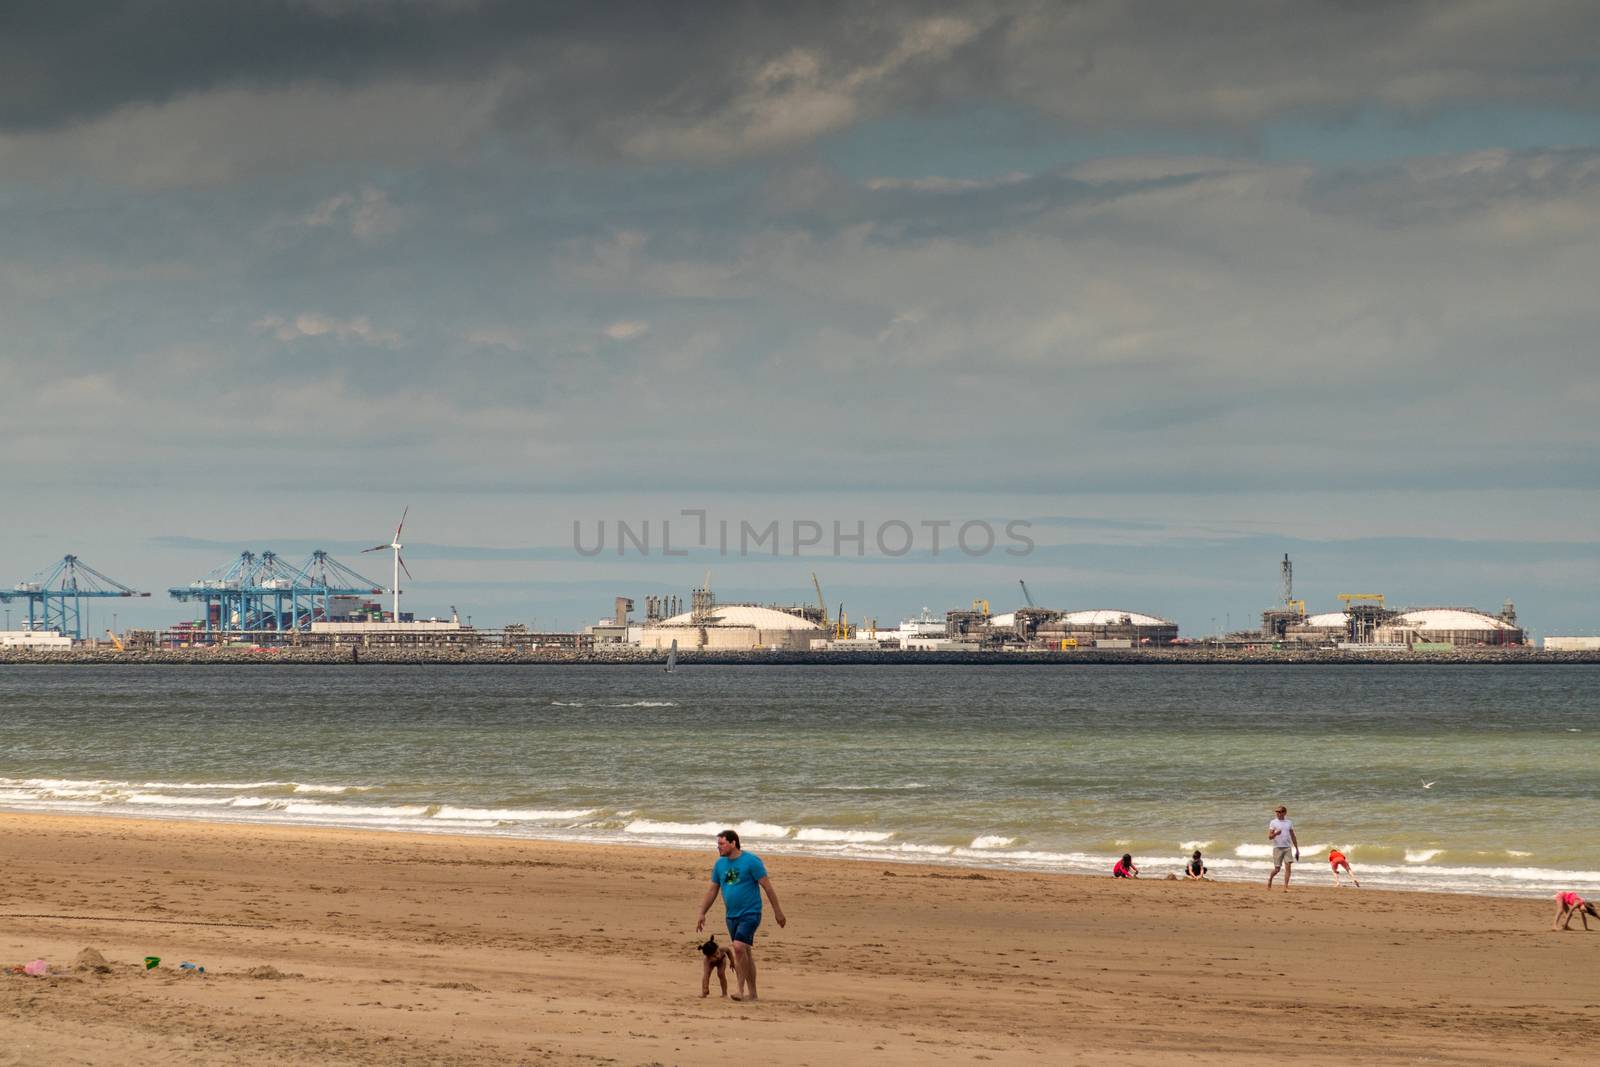 LNG sea terminal seen from beach in Zoute, Knokke-Heist, Belgium by Claudine